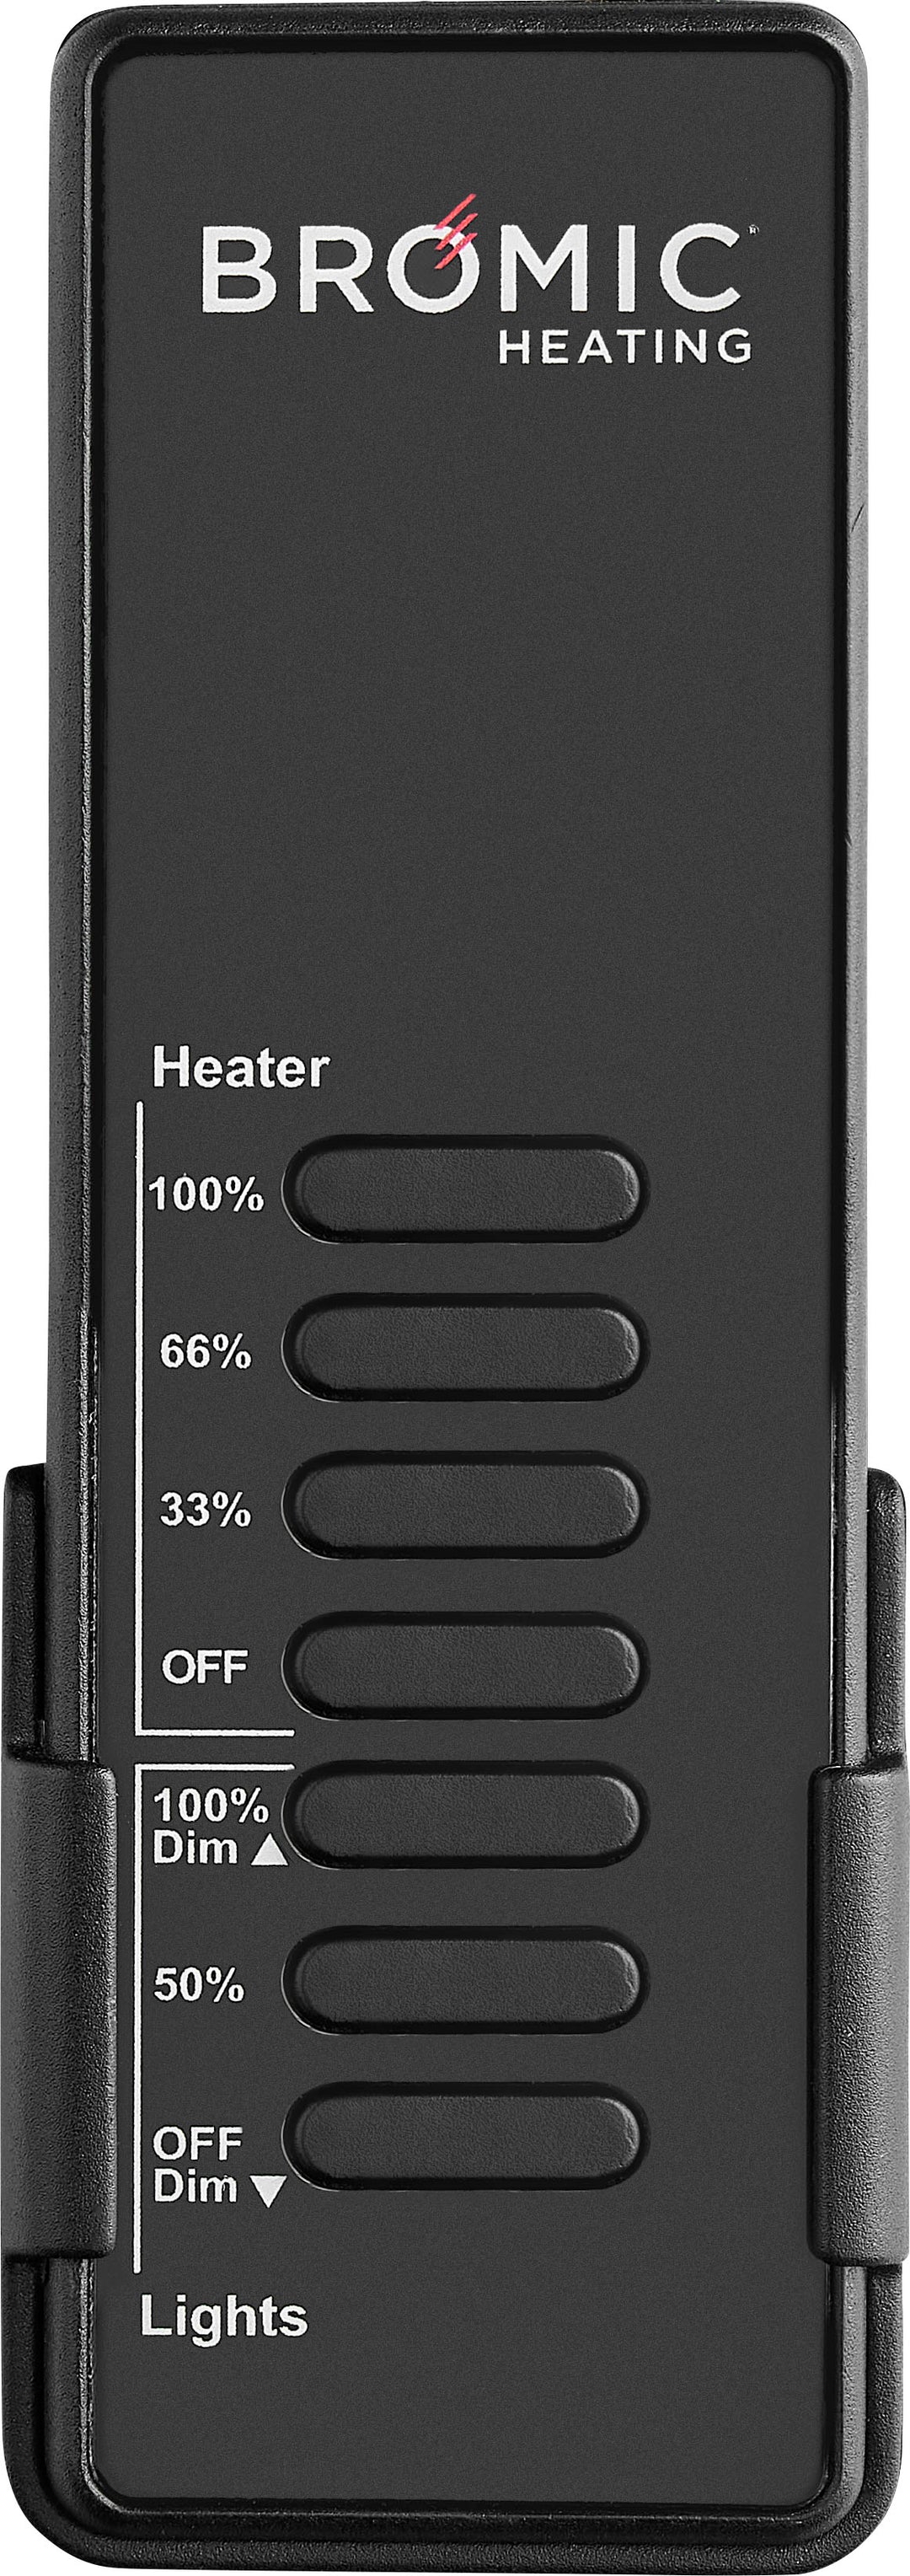 Bromic Heating - Outdoor Heater - Eclipse Electric & Dimmer Controller - 2900W - 220-240V - Black_1